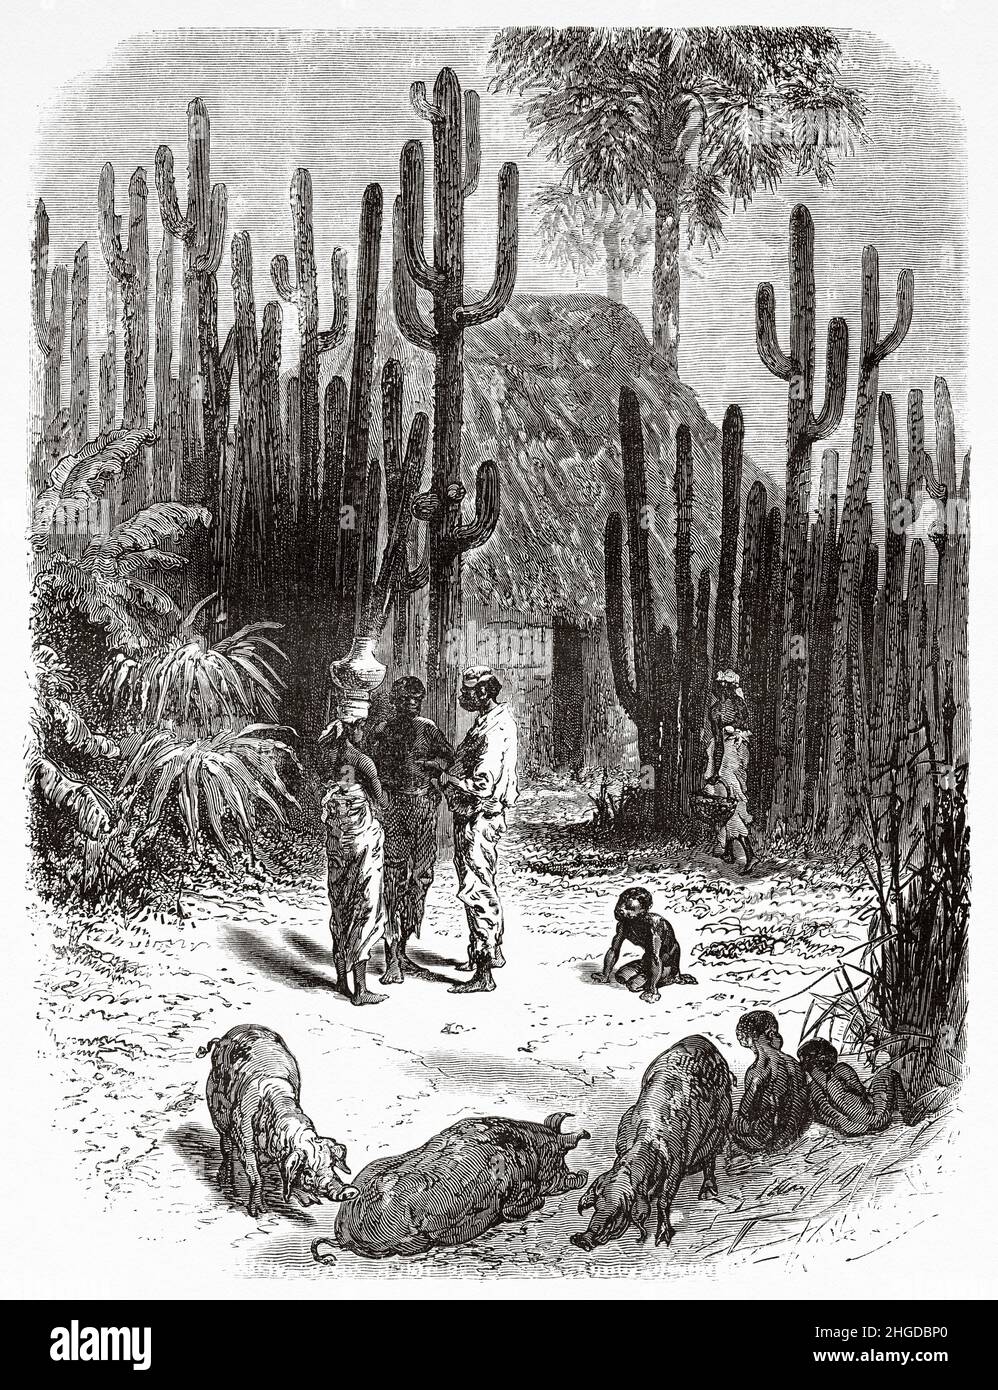 A hut of blacks peoples, Florida, United States of America. Old 19th century engraved illustration from Four months in Florida by Achille Poussielgue, Le Tour du Monde 1870 Stock Photo